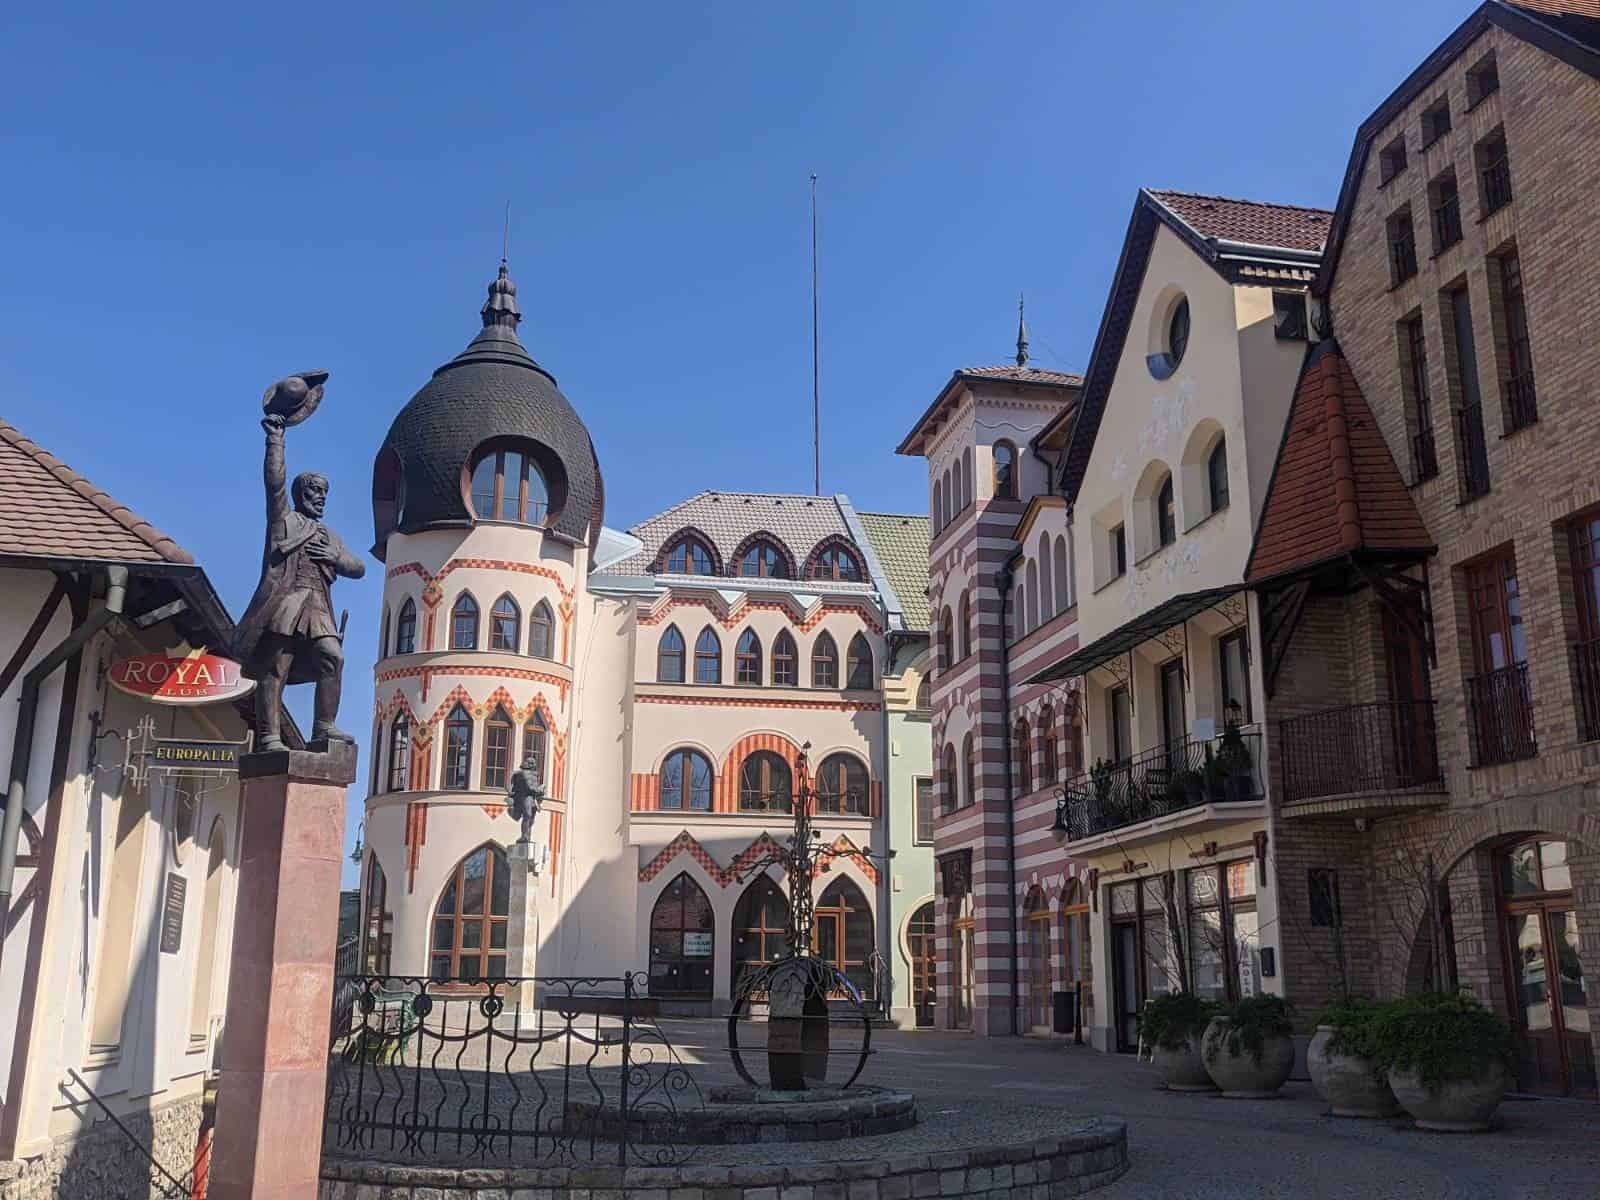 Komárno’s Courtyard of Europe, still under construction. A heartfelt blend of European architectural styles making up a square in the centre of town